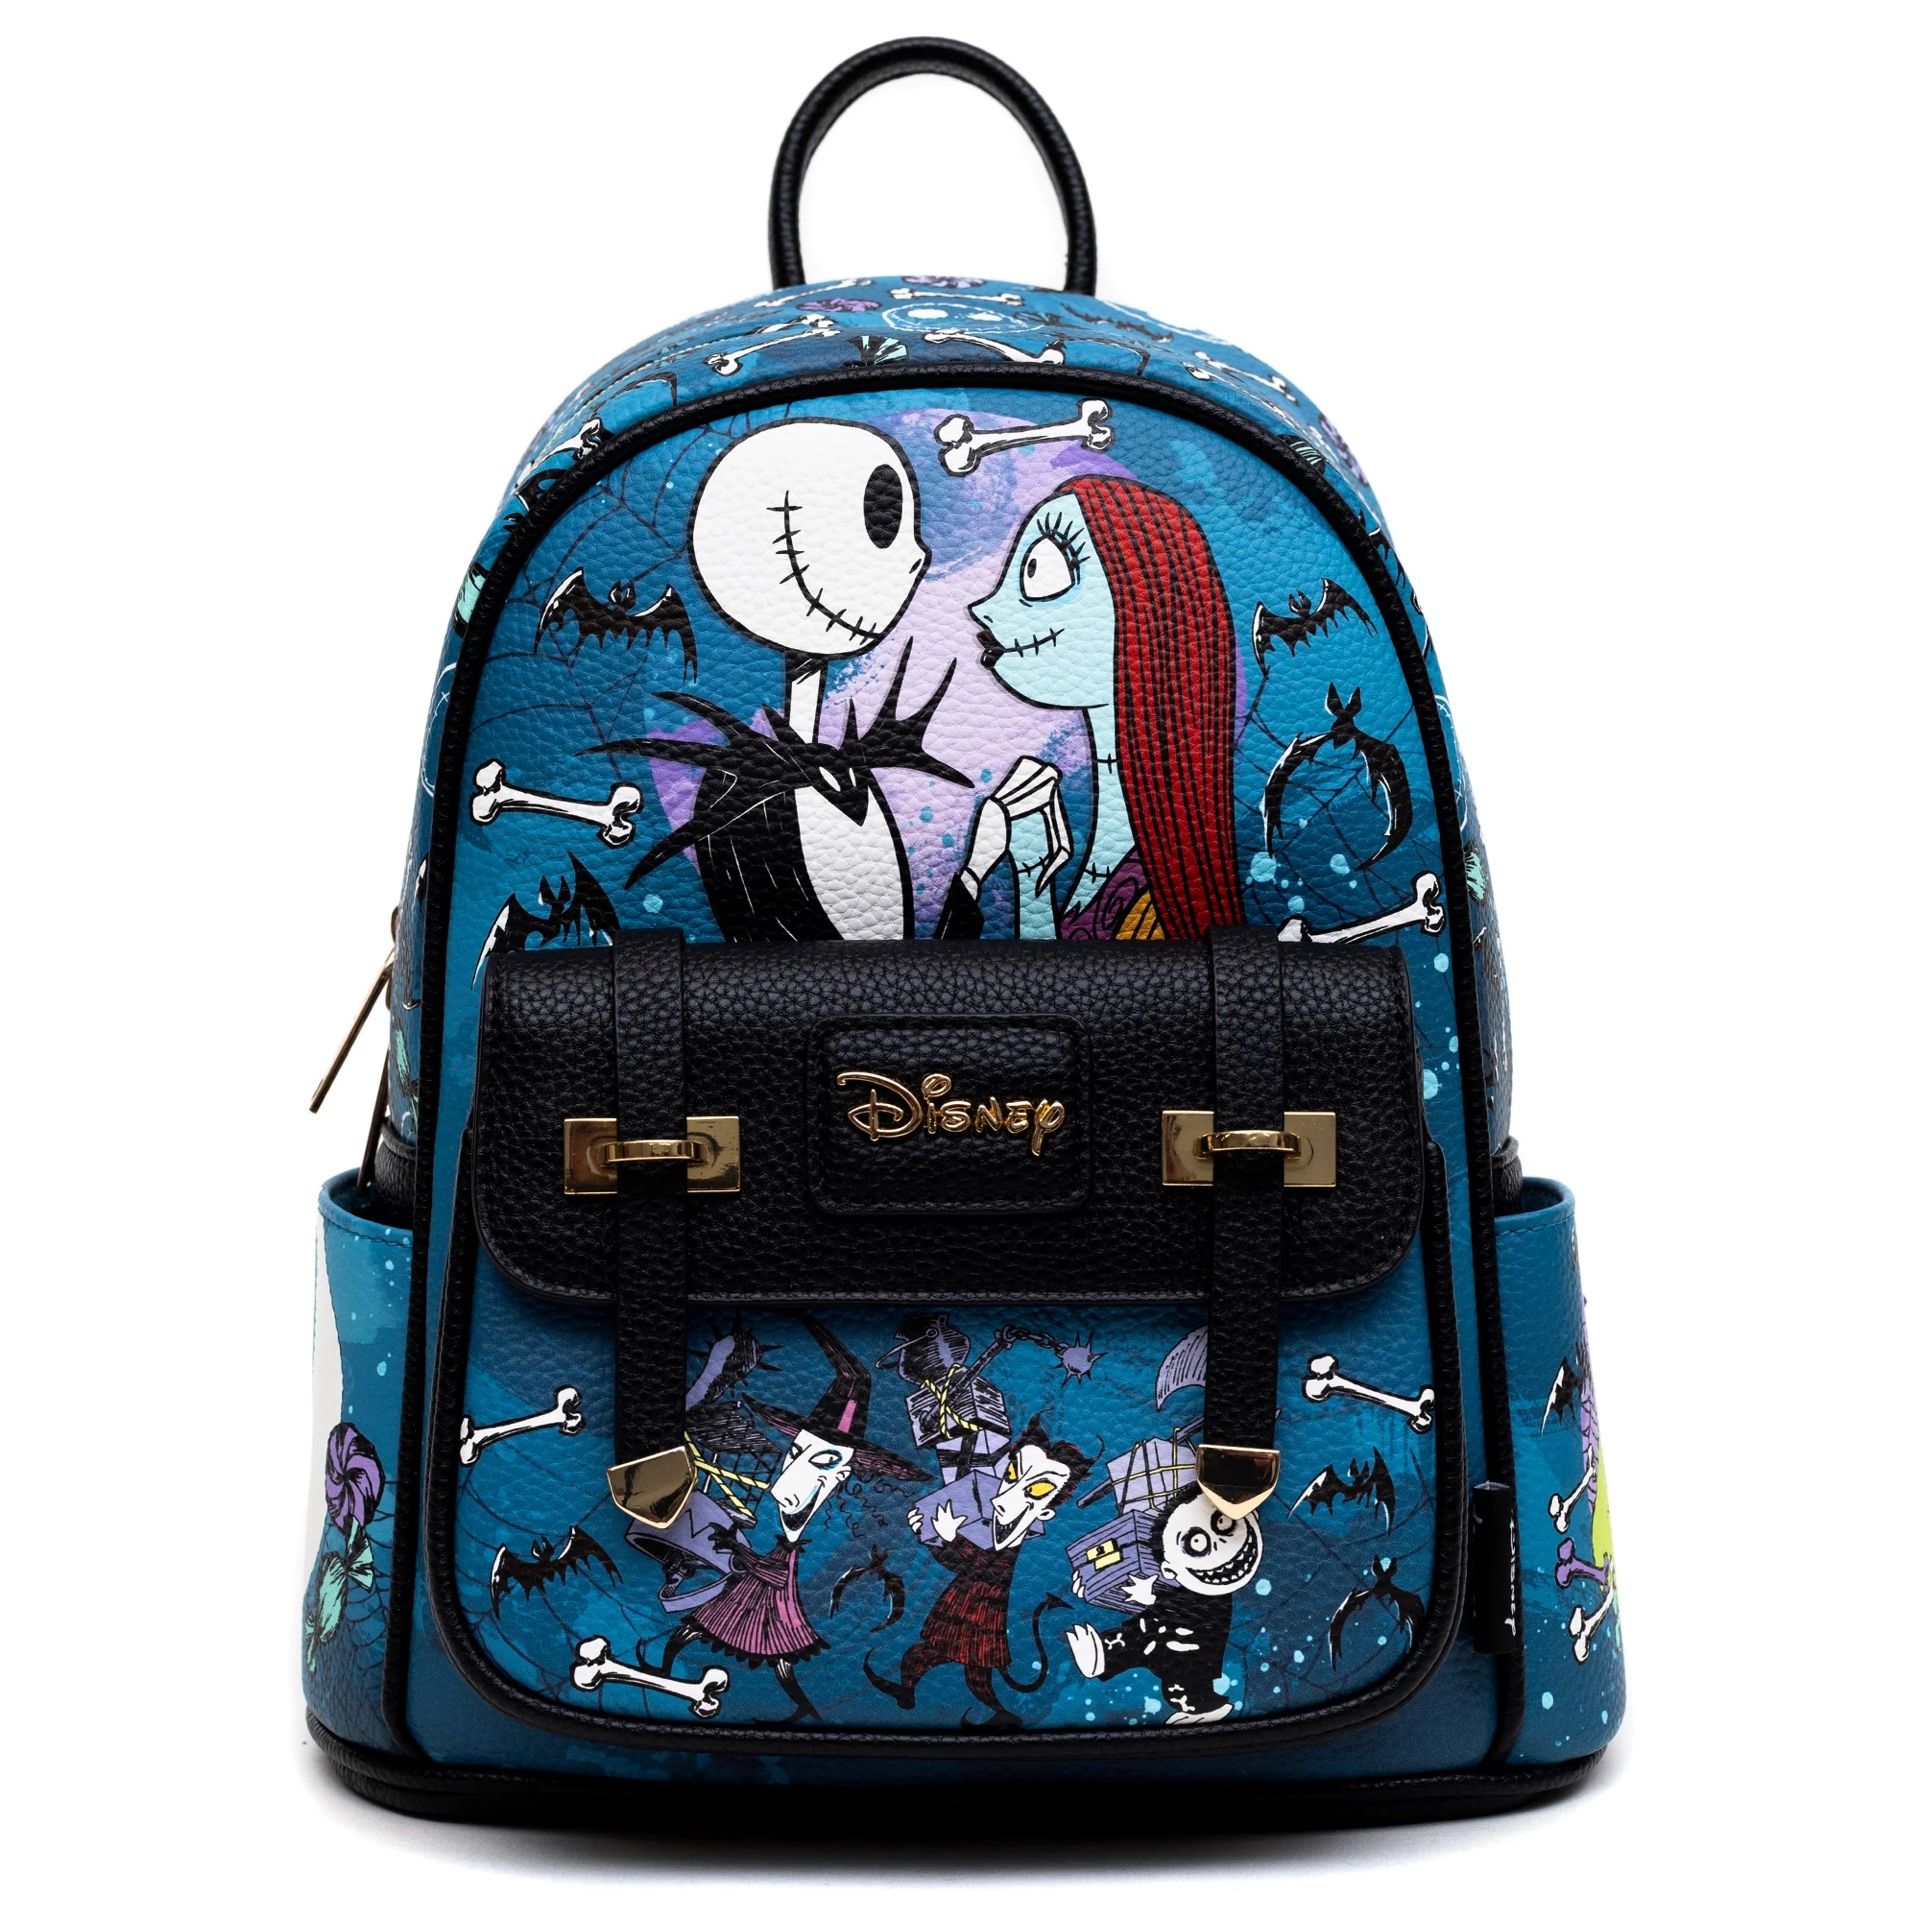 NEW The Nightmare Before Christmas Mini Faux Leather Adjustable Strap Backpack